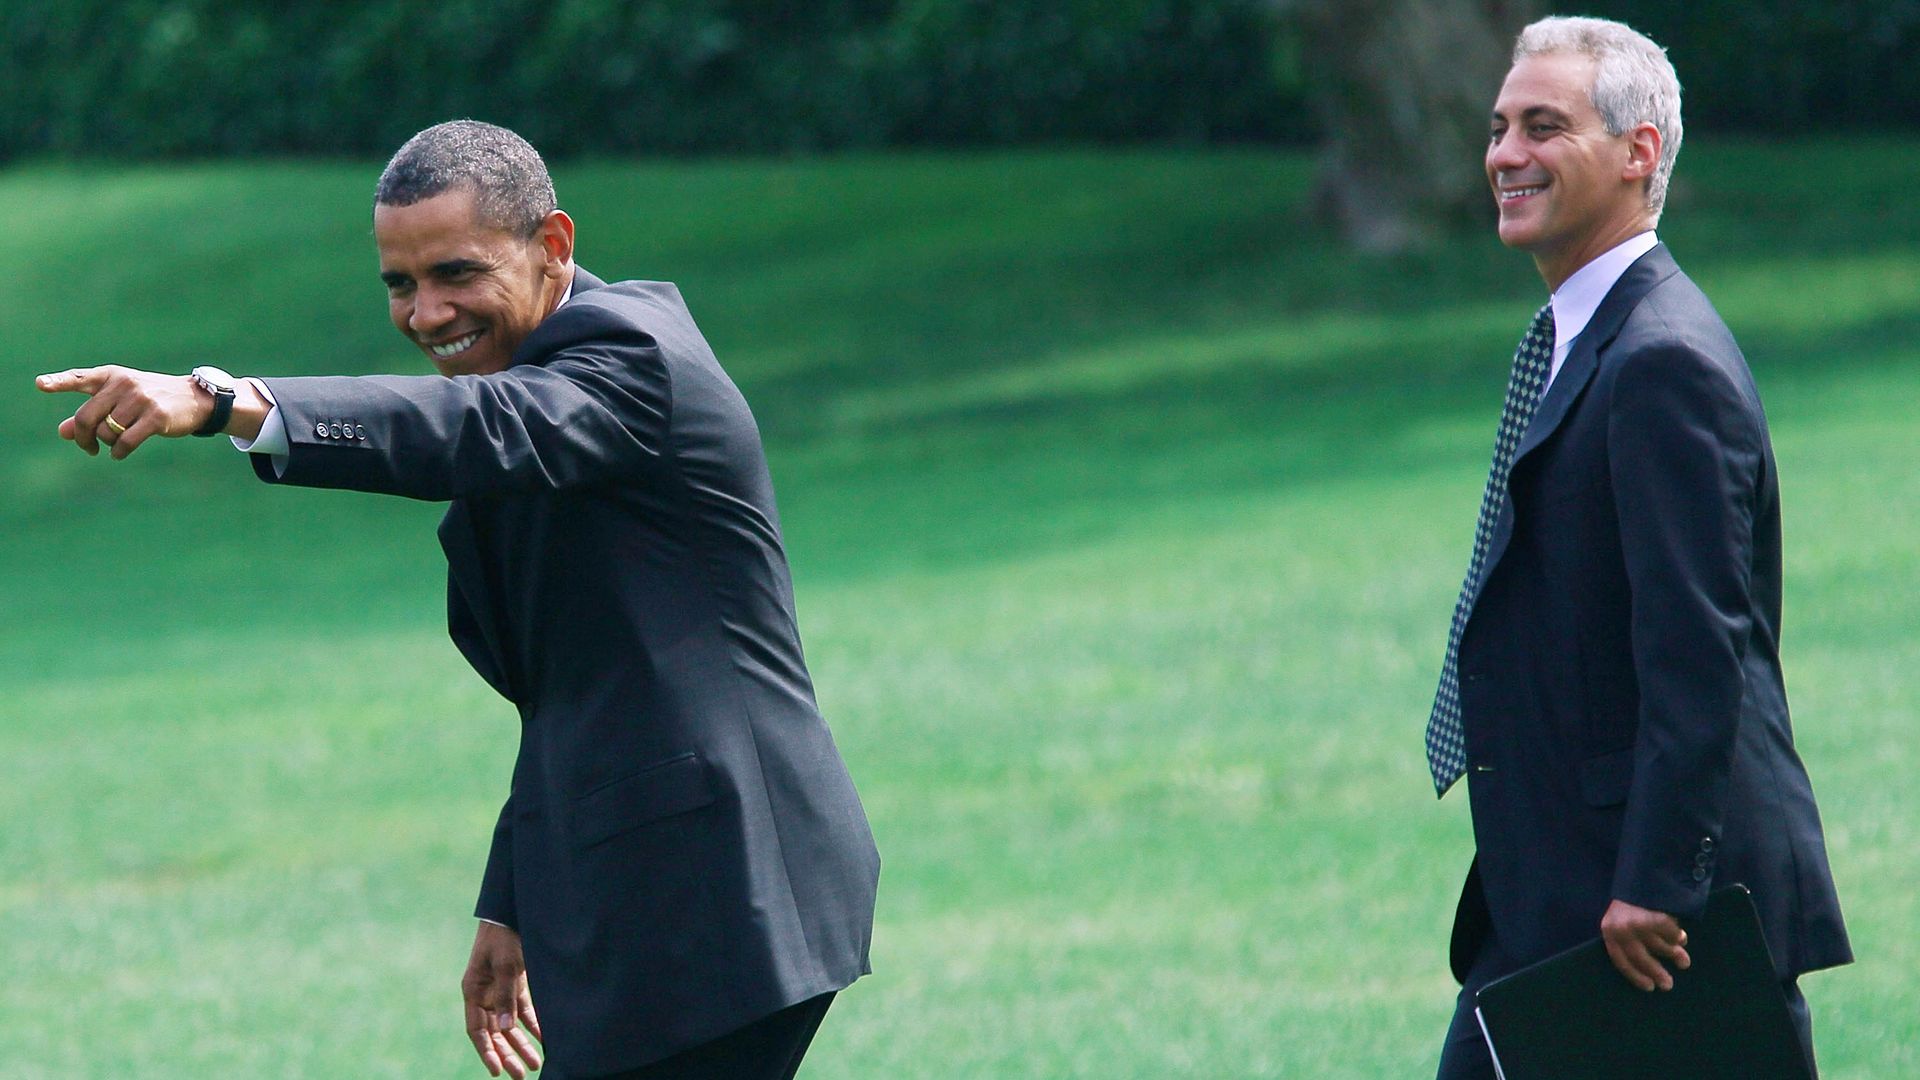 Former White House Chief of Staff Rahm Emanuel walks behind President Obama in 2010.